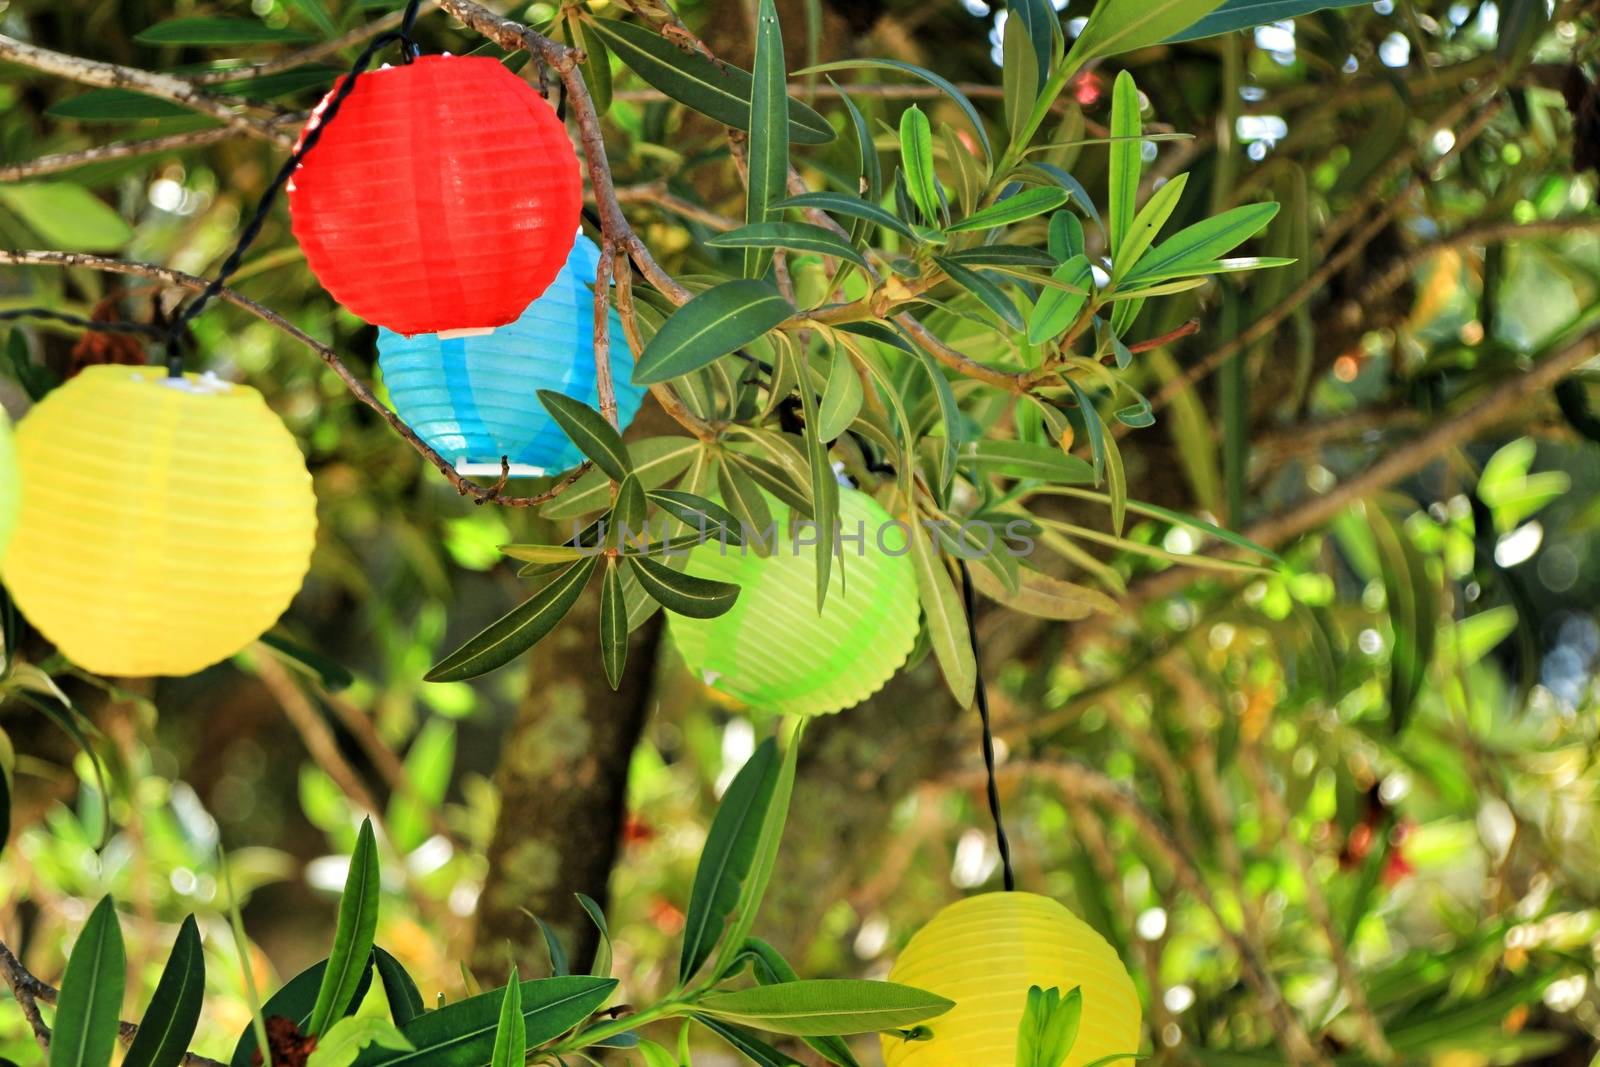 Colored round lanterns hanging on a tree in the garden